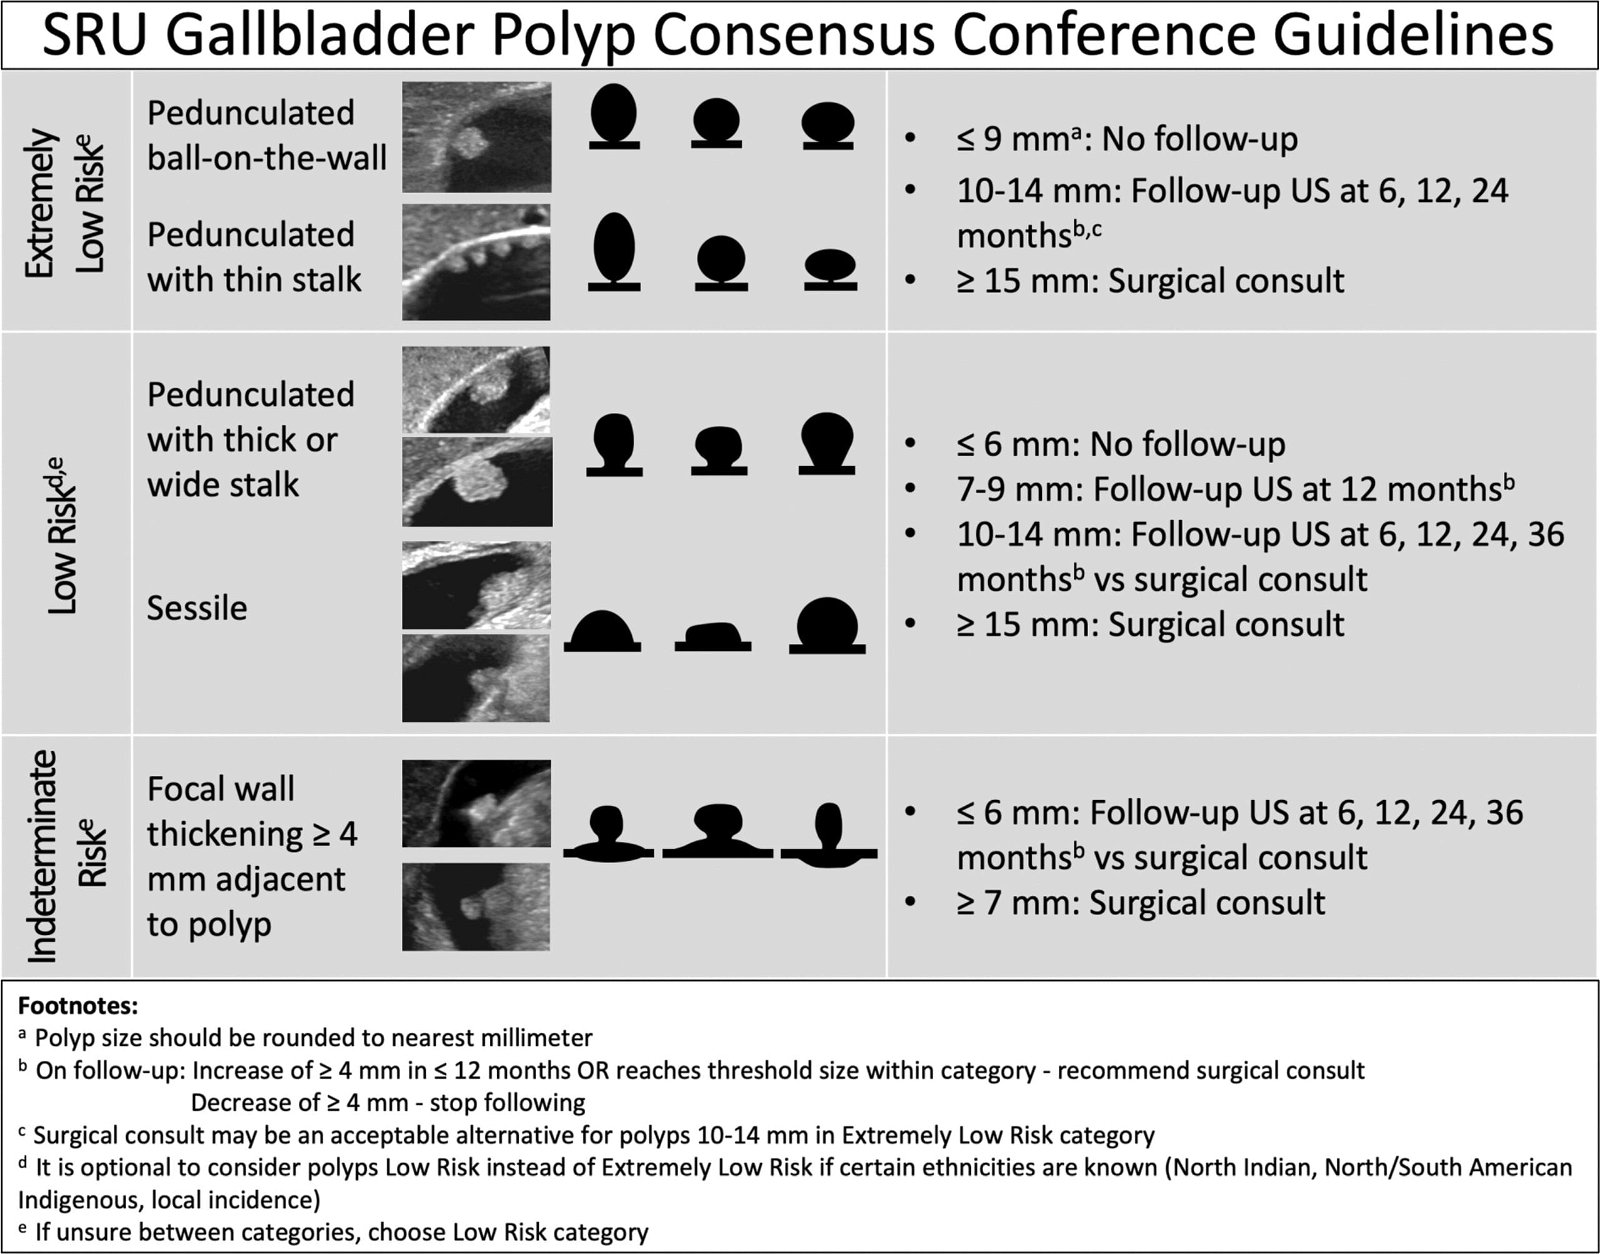 SRU Gallbladder Polyp Consensus Guidelines Radiology Quick Reference Chart